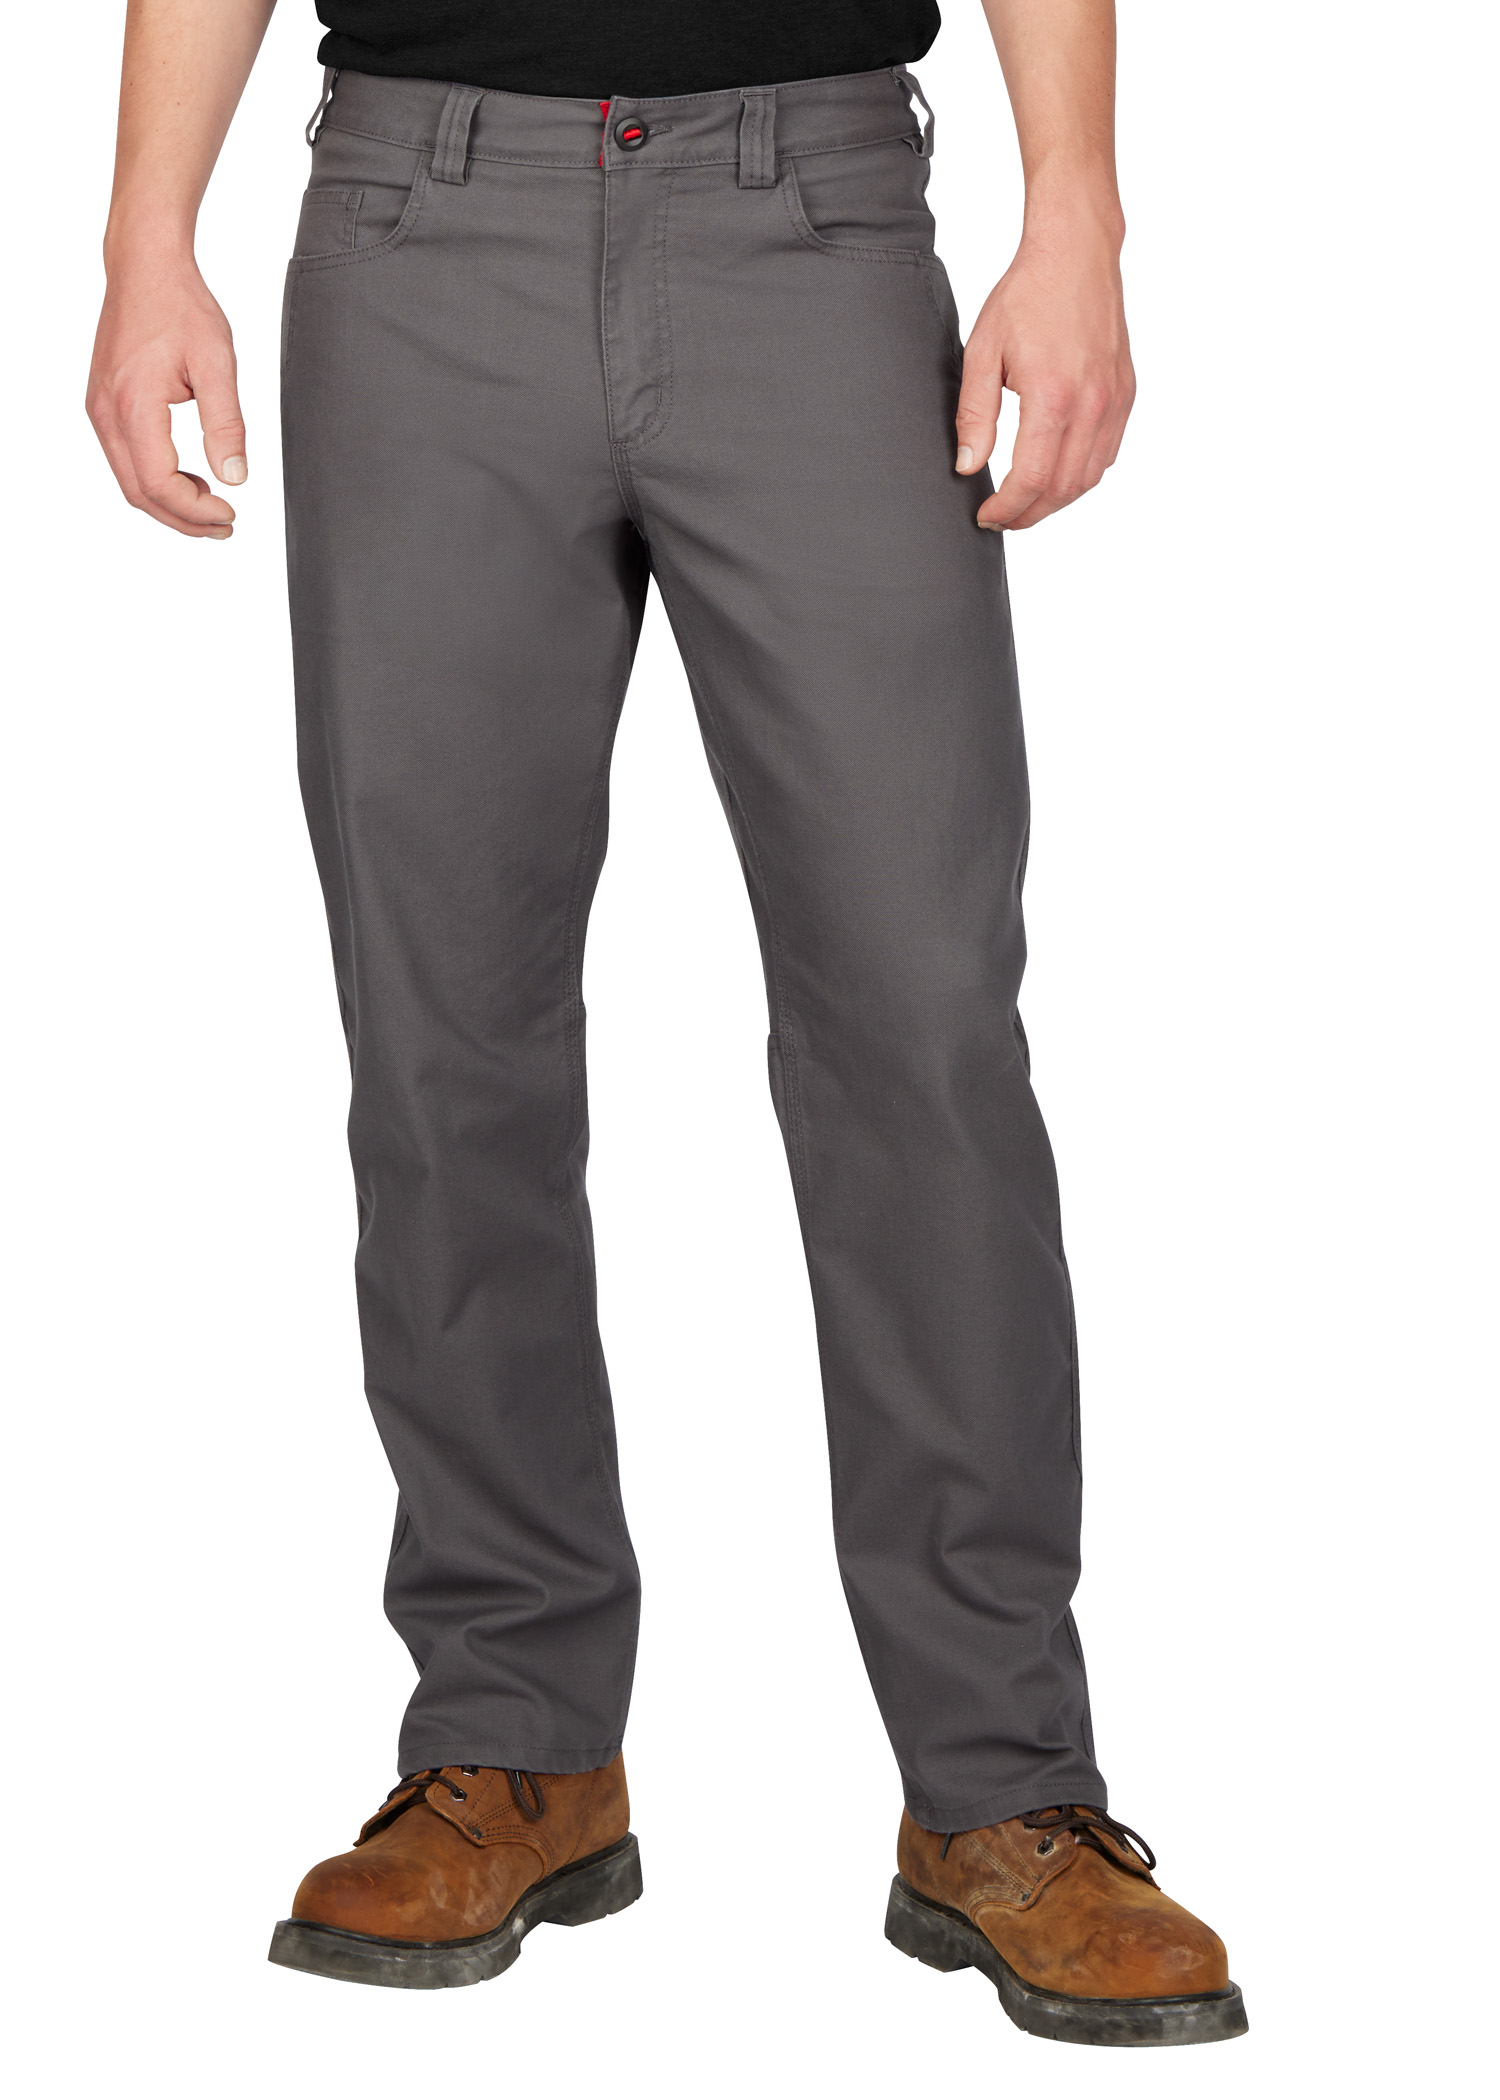 Milwaukee Introduces Heavy Duty Work Pants with FREEFLEX Mobility ...